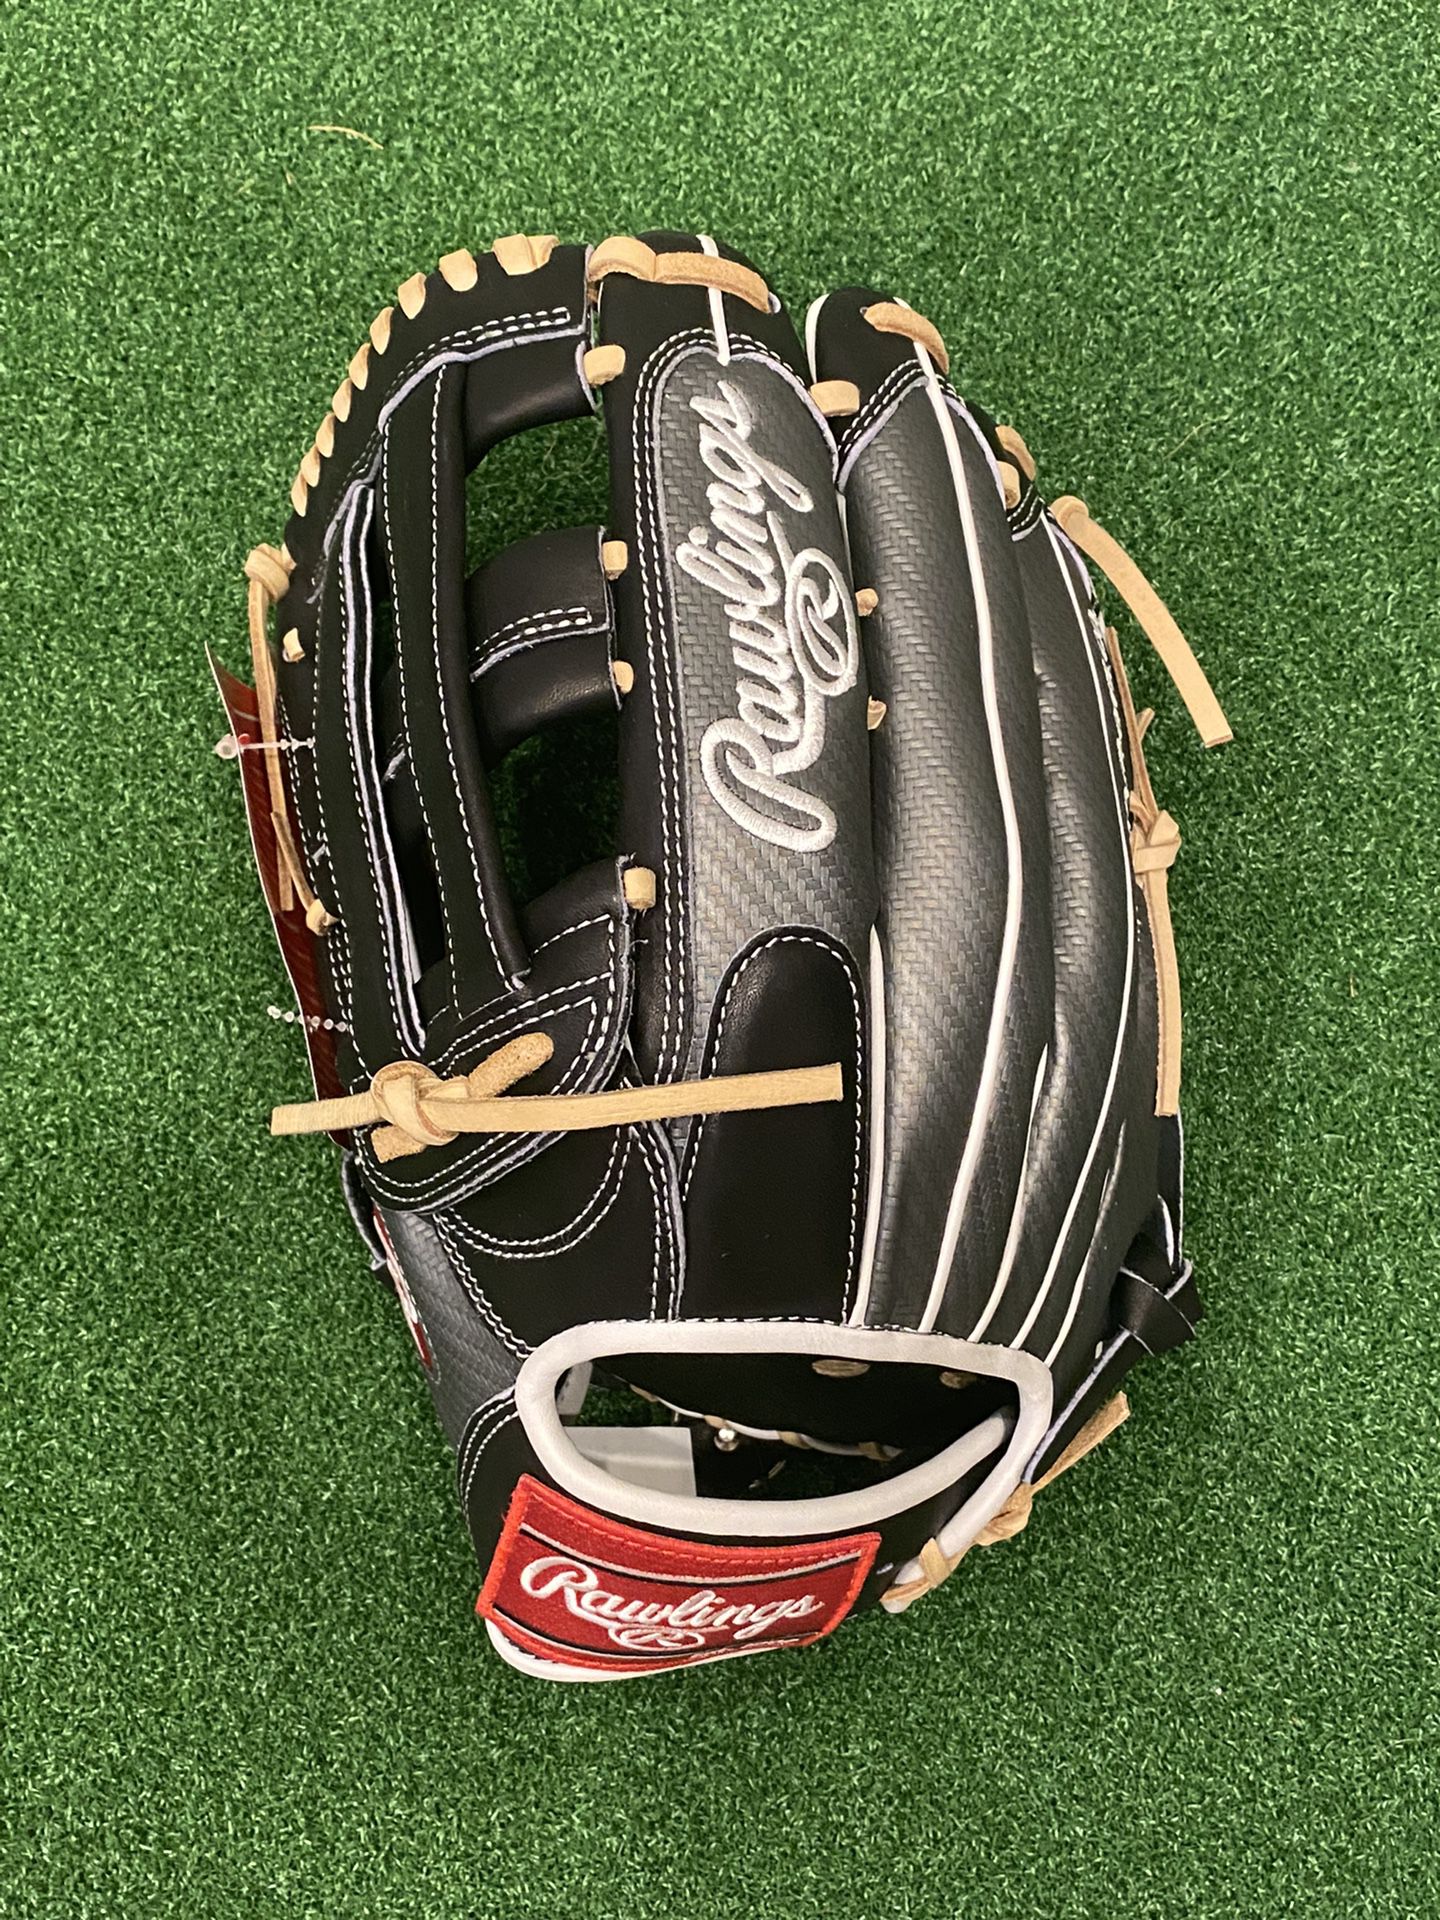 New With Tags Rawlings 12.75 HOH Lefty Baseball Glove